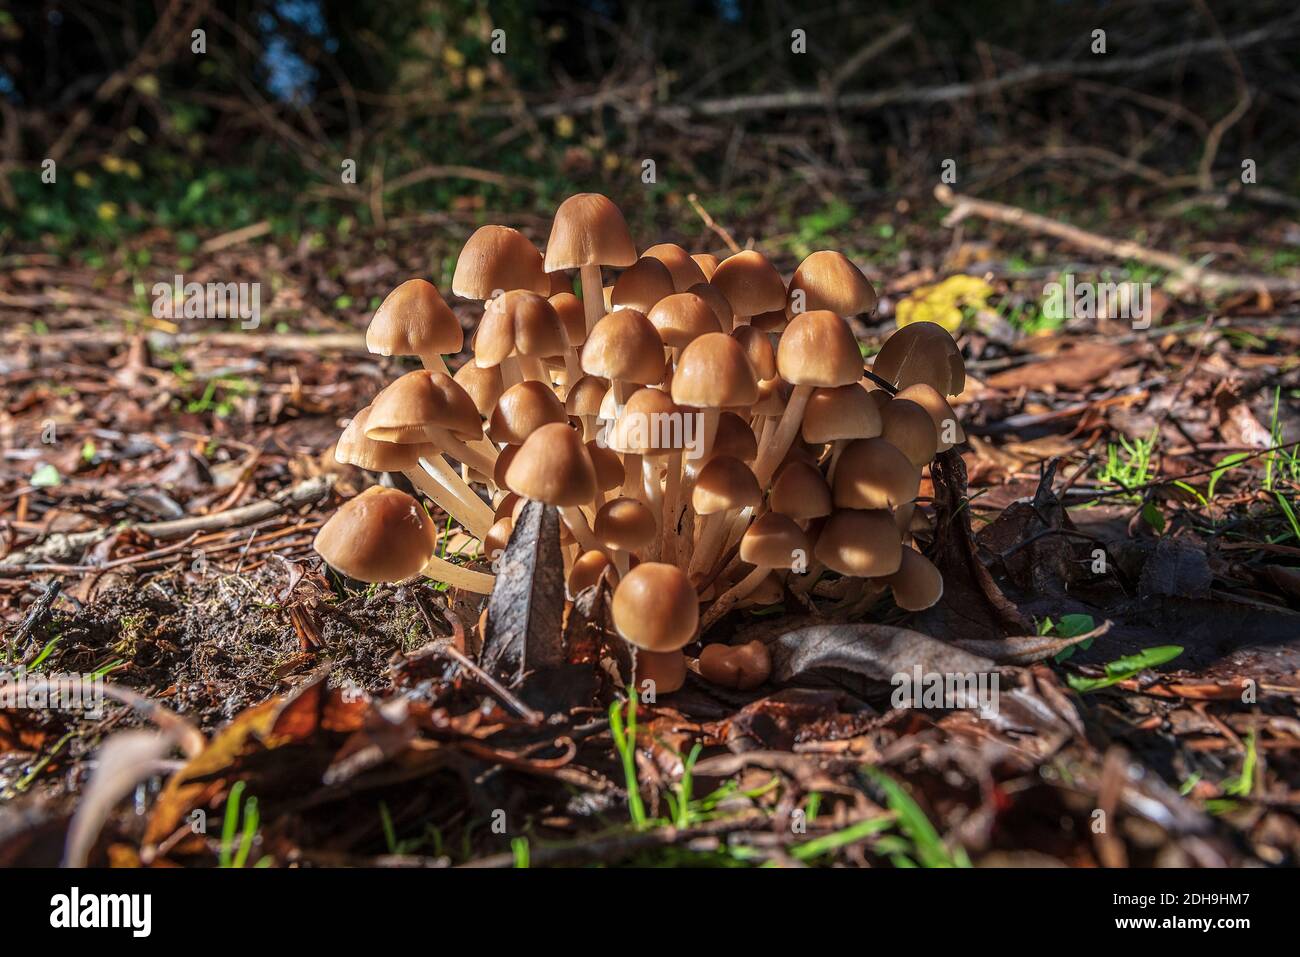 Woodland mushrooms in a large bunch. Stock Photo